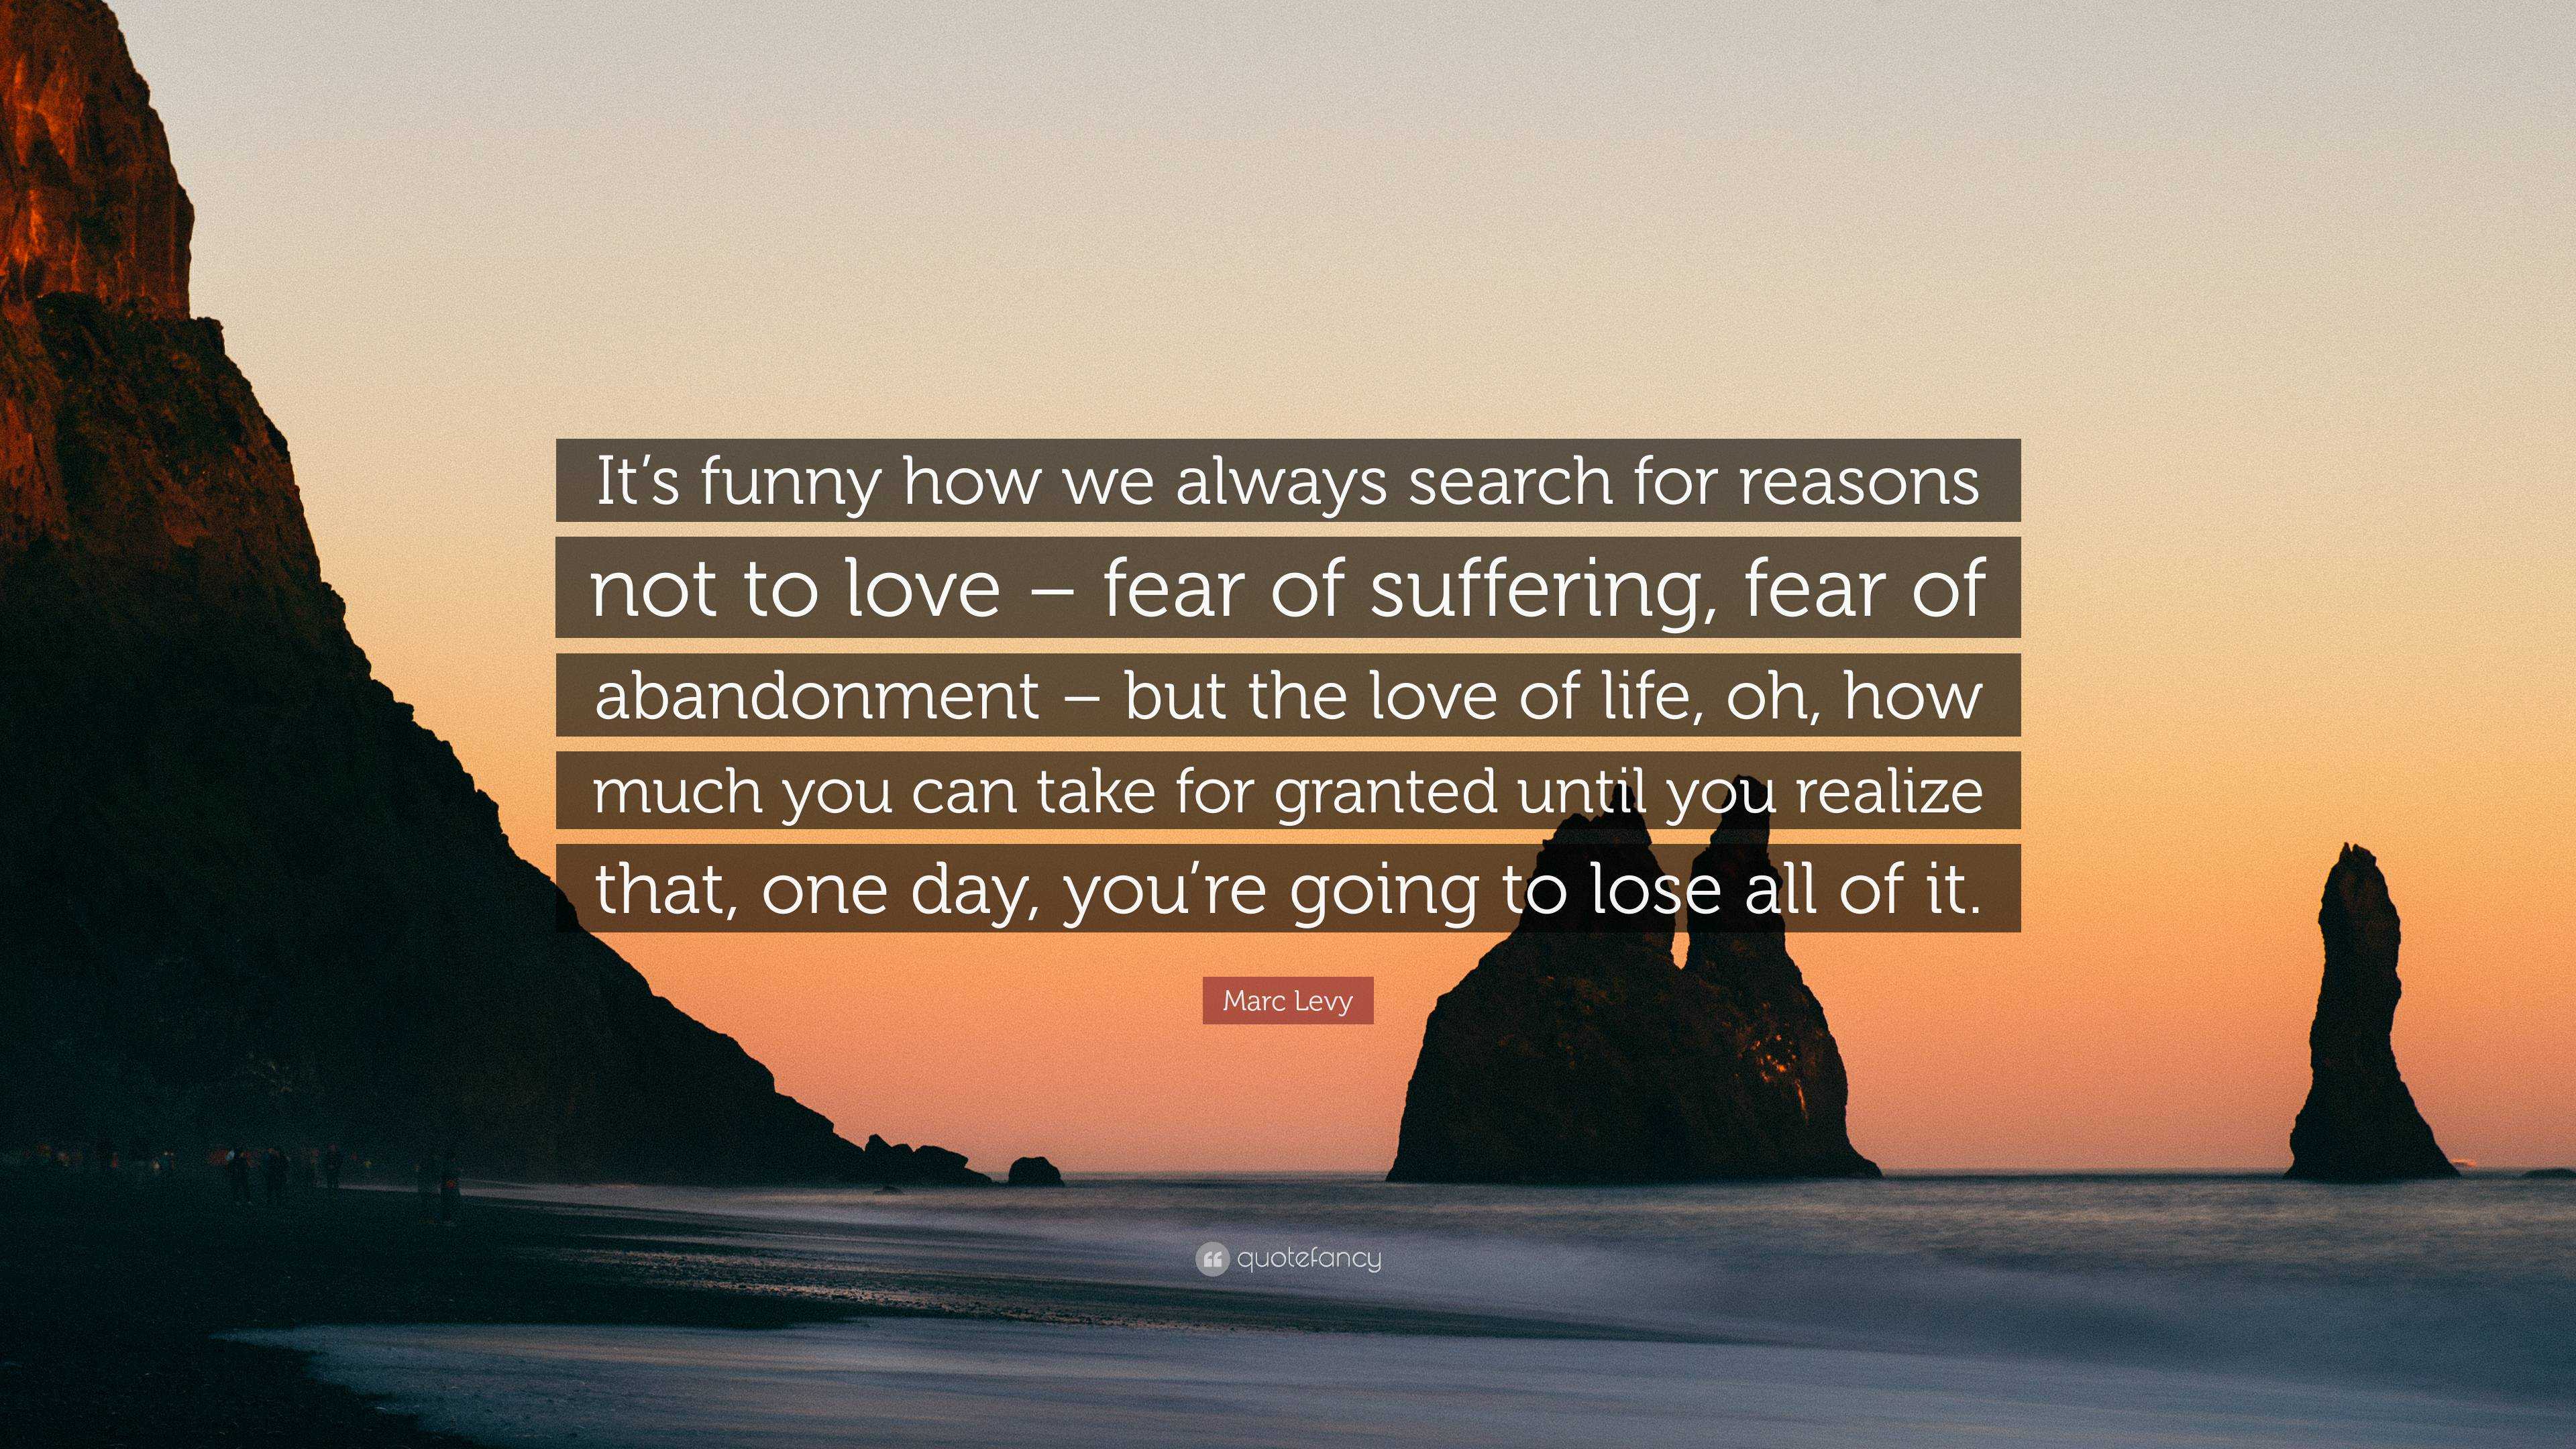 Marc Levy Quote: “It's funny how we always search for reasons not to love –  fear of suffering, fear of abandonment – but the love of life,...”